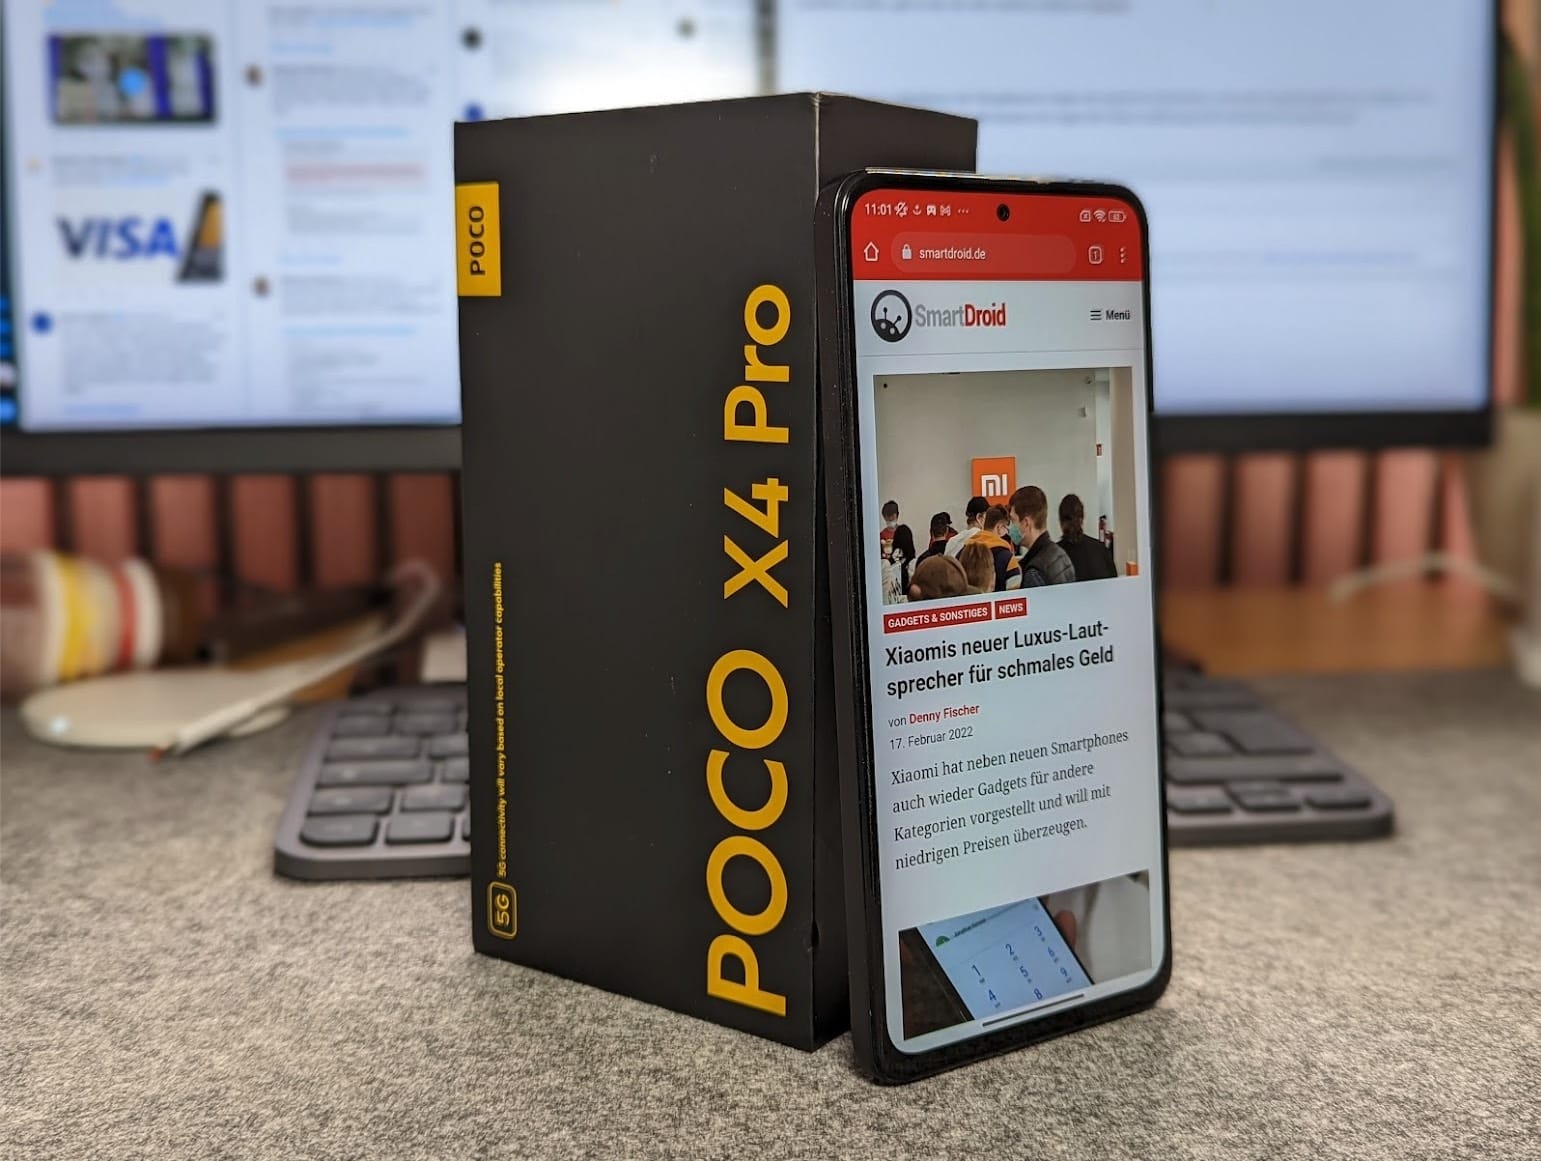 Poco X4 Pro 5G with 120Hz Refresh Rate, 64MP Triple-Camera Setup Launched  in India: Price, Specifications - MySmartPrice